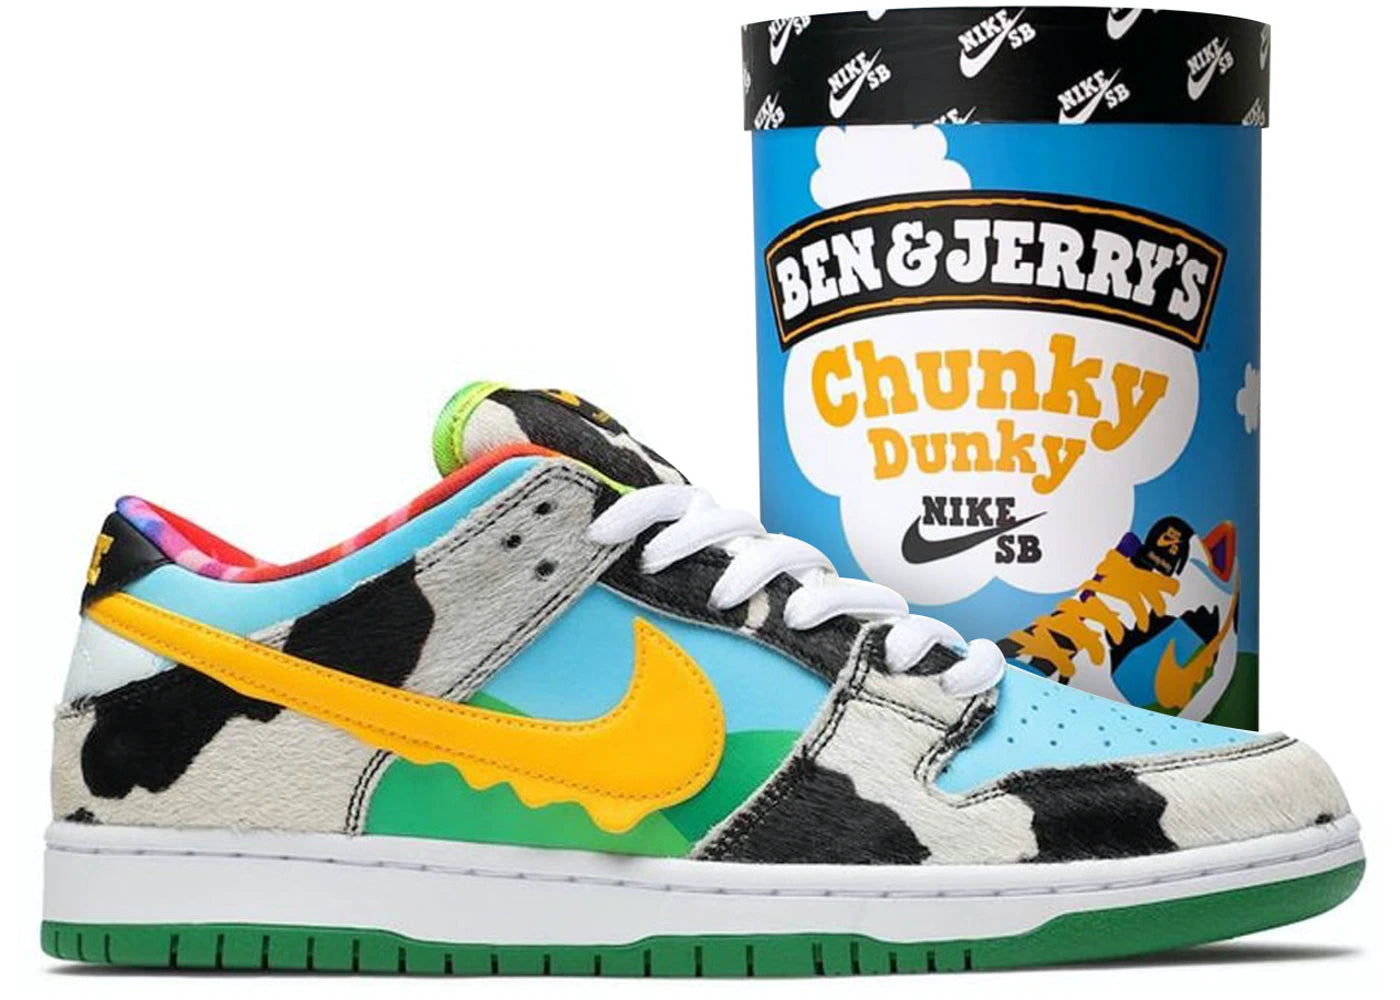 NIKE SB DUNK LOW BEN & JERRY'S CHUNKY DUNKY (F&F PACKAGING)